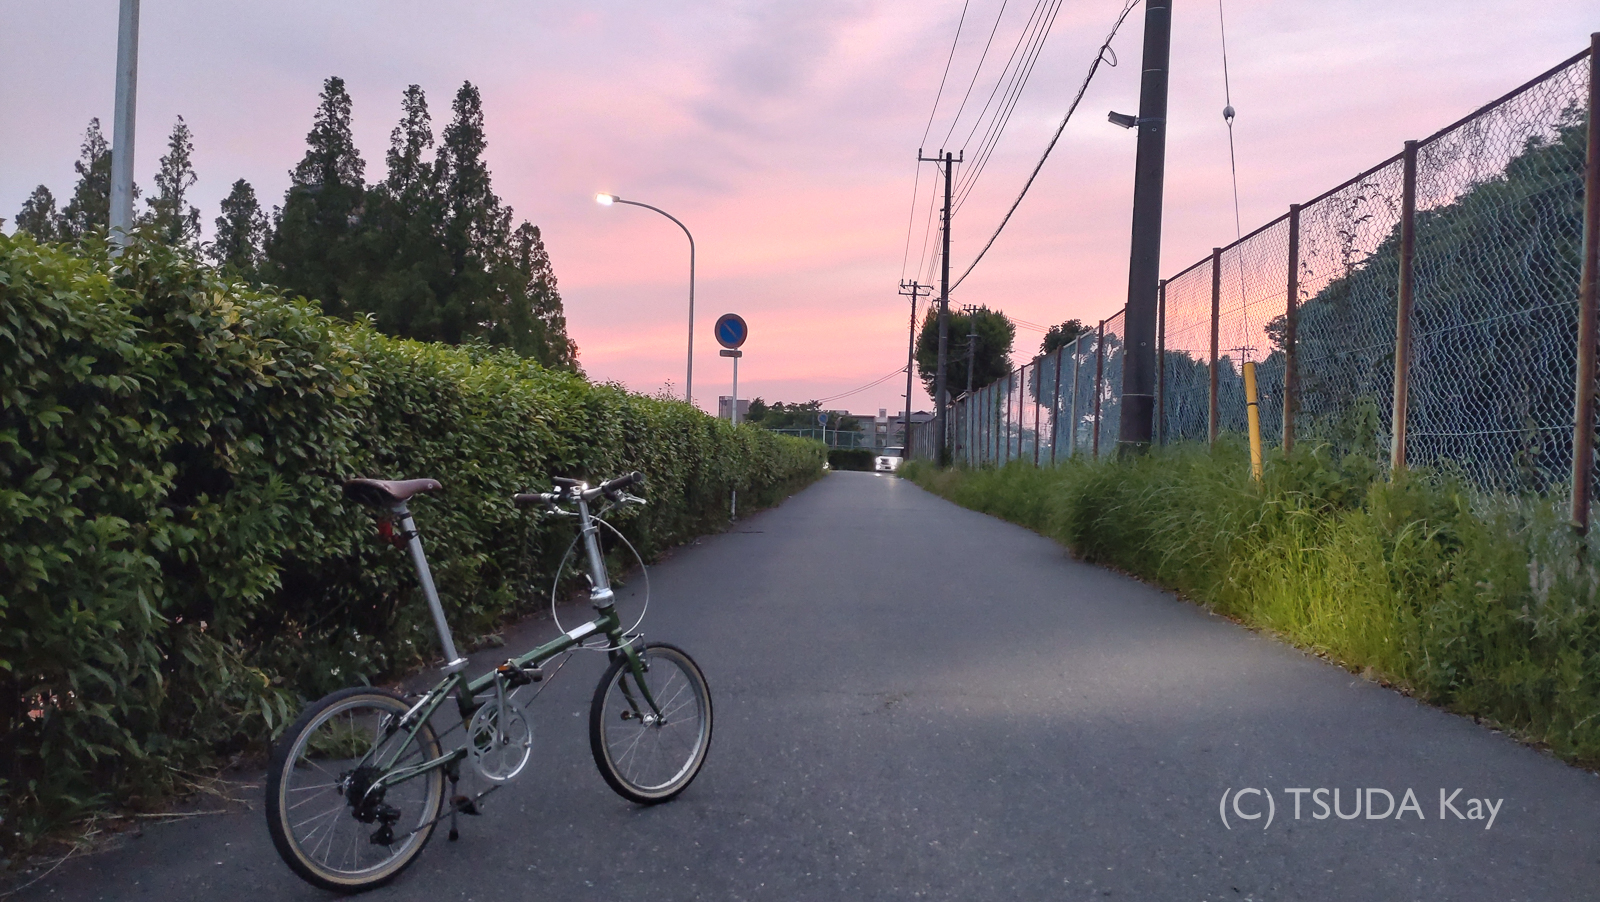 I cycled 100km with dahon boardwalk d7 05